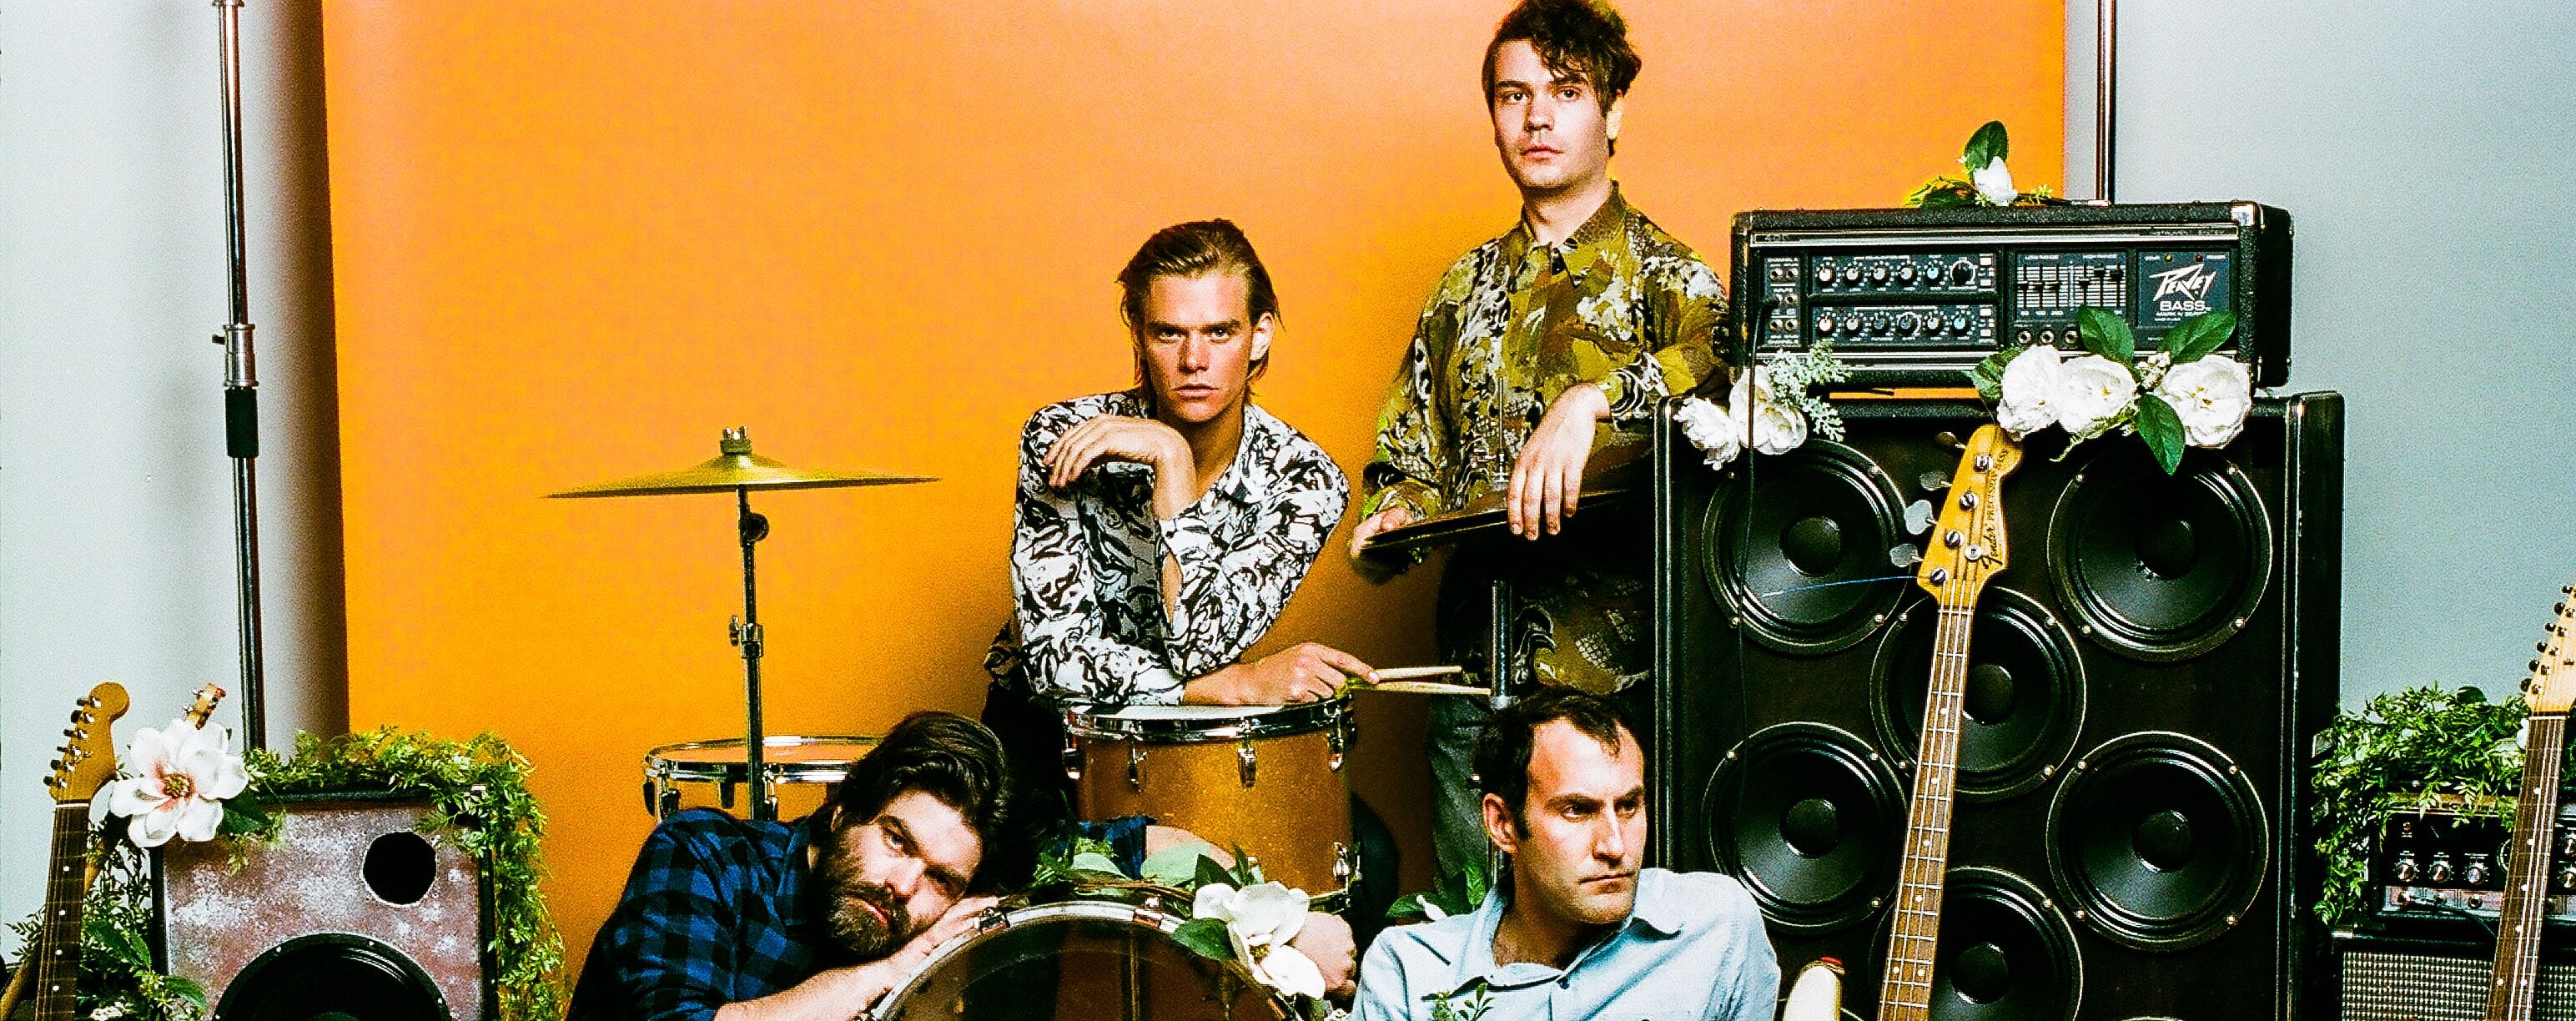 Preoccupations and Protomartyr impress their fans at Brighton Music Hall